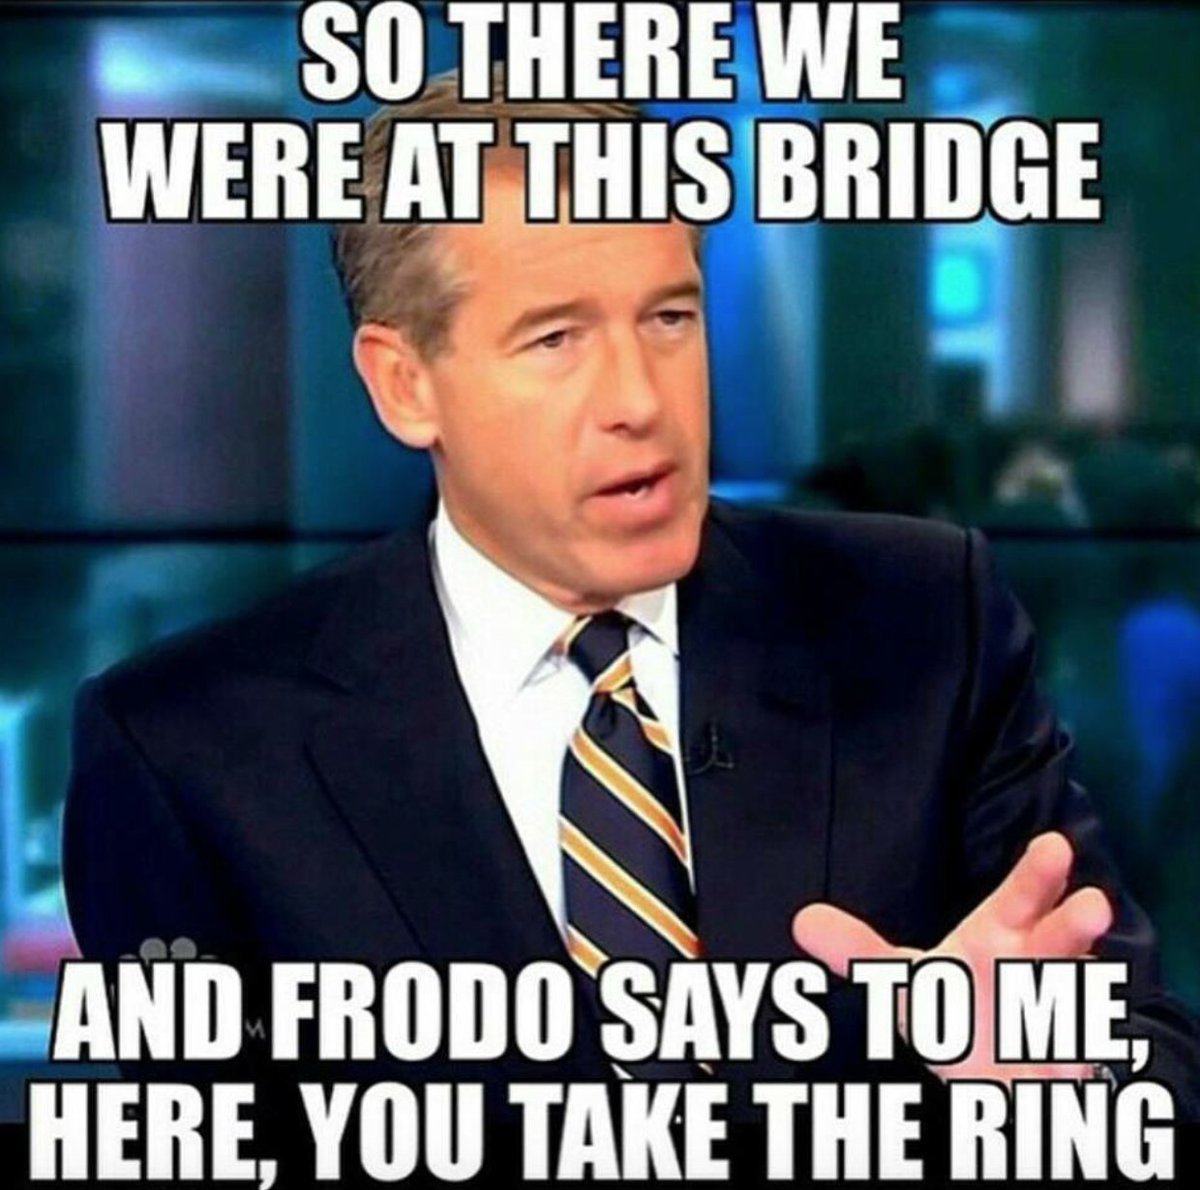 She’s not Brian Williams, making up and exaggerating stories on the evening news. (And you see how minimally Williams’s career was derailed by his fabulism.) https://bit.ly/3o1wARO 